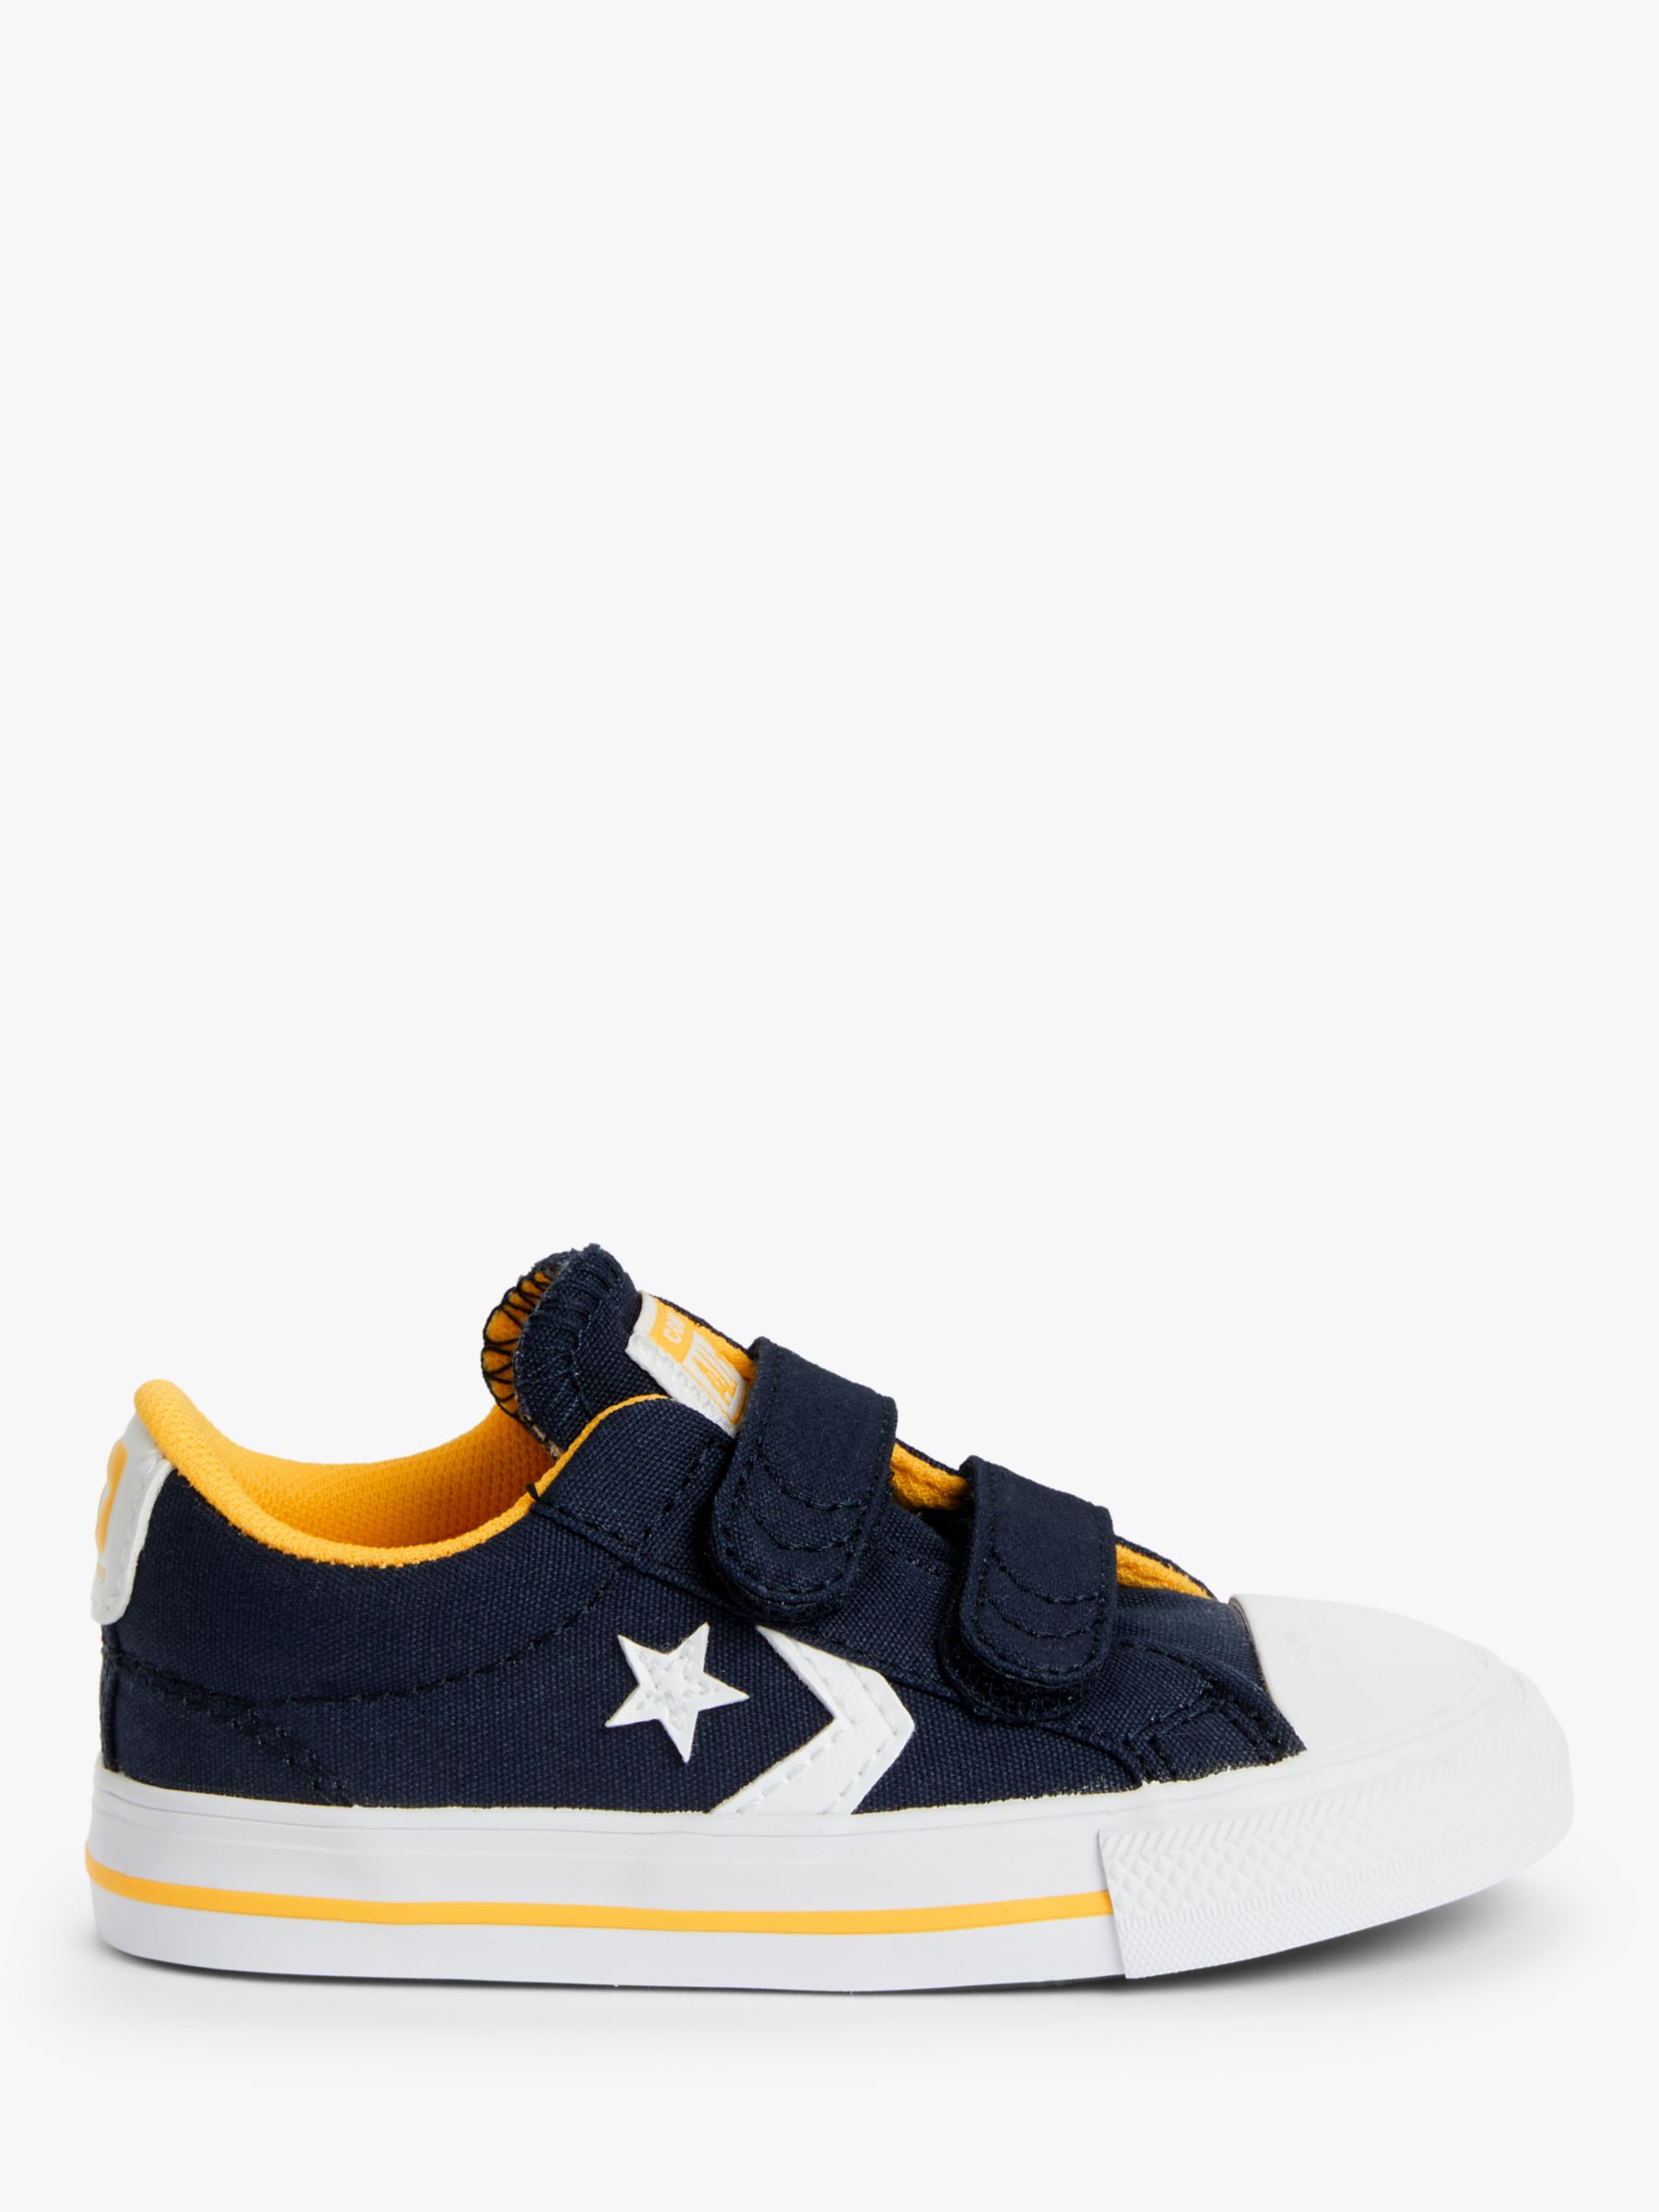 converse star player yellow